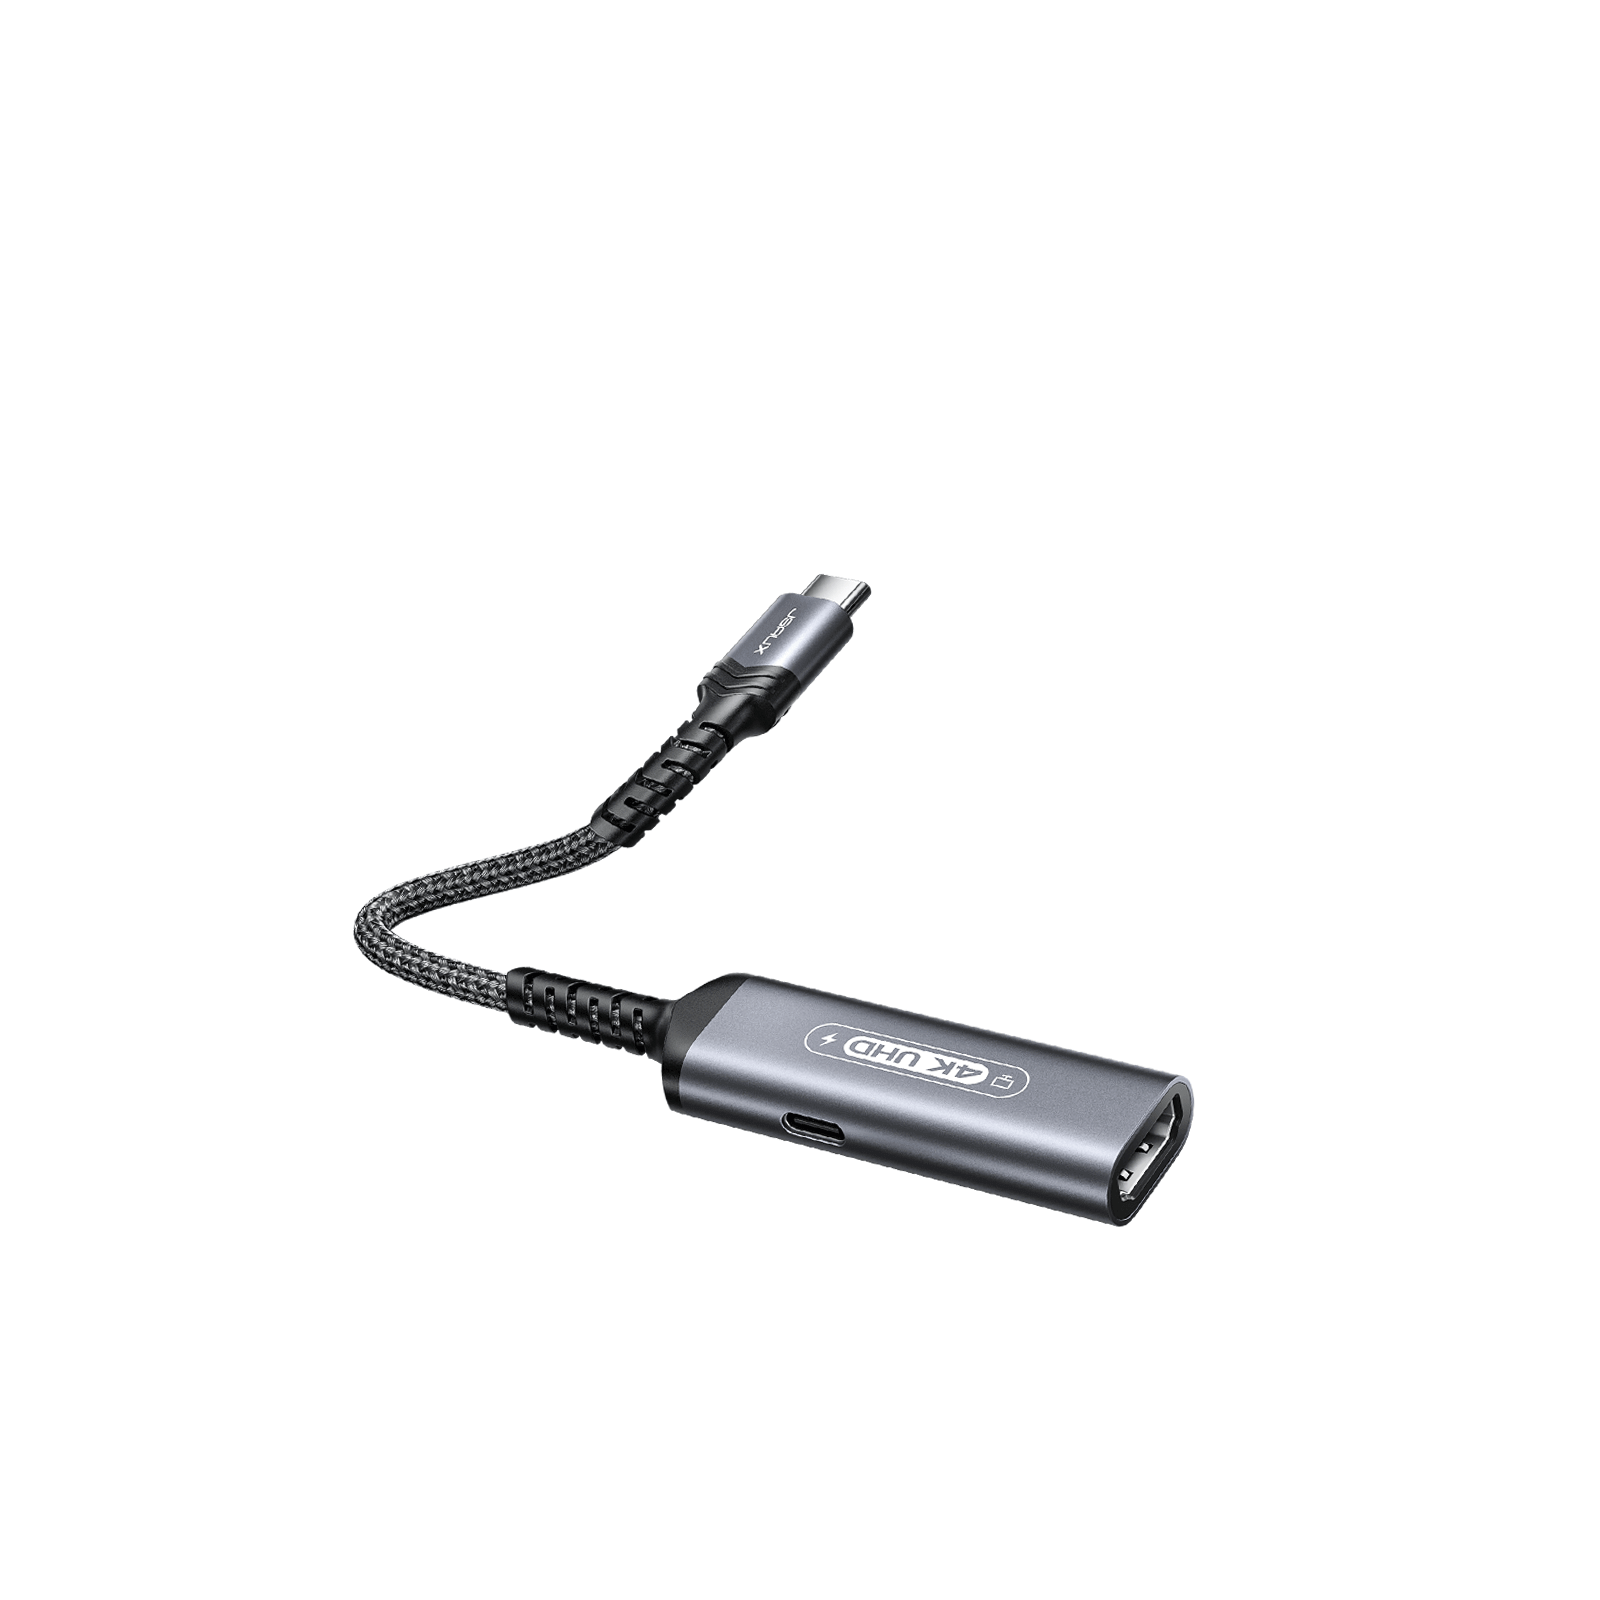 2-in-1 USB-C to 4K@60Hz HDMI Charging Adapter2-in-1 USB-C to 4K@60Hz HDMI Charging Adapter